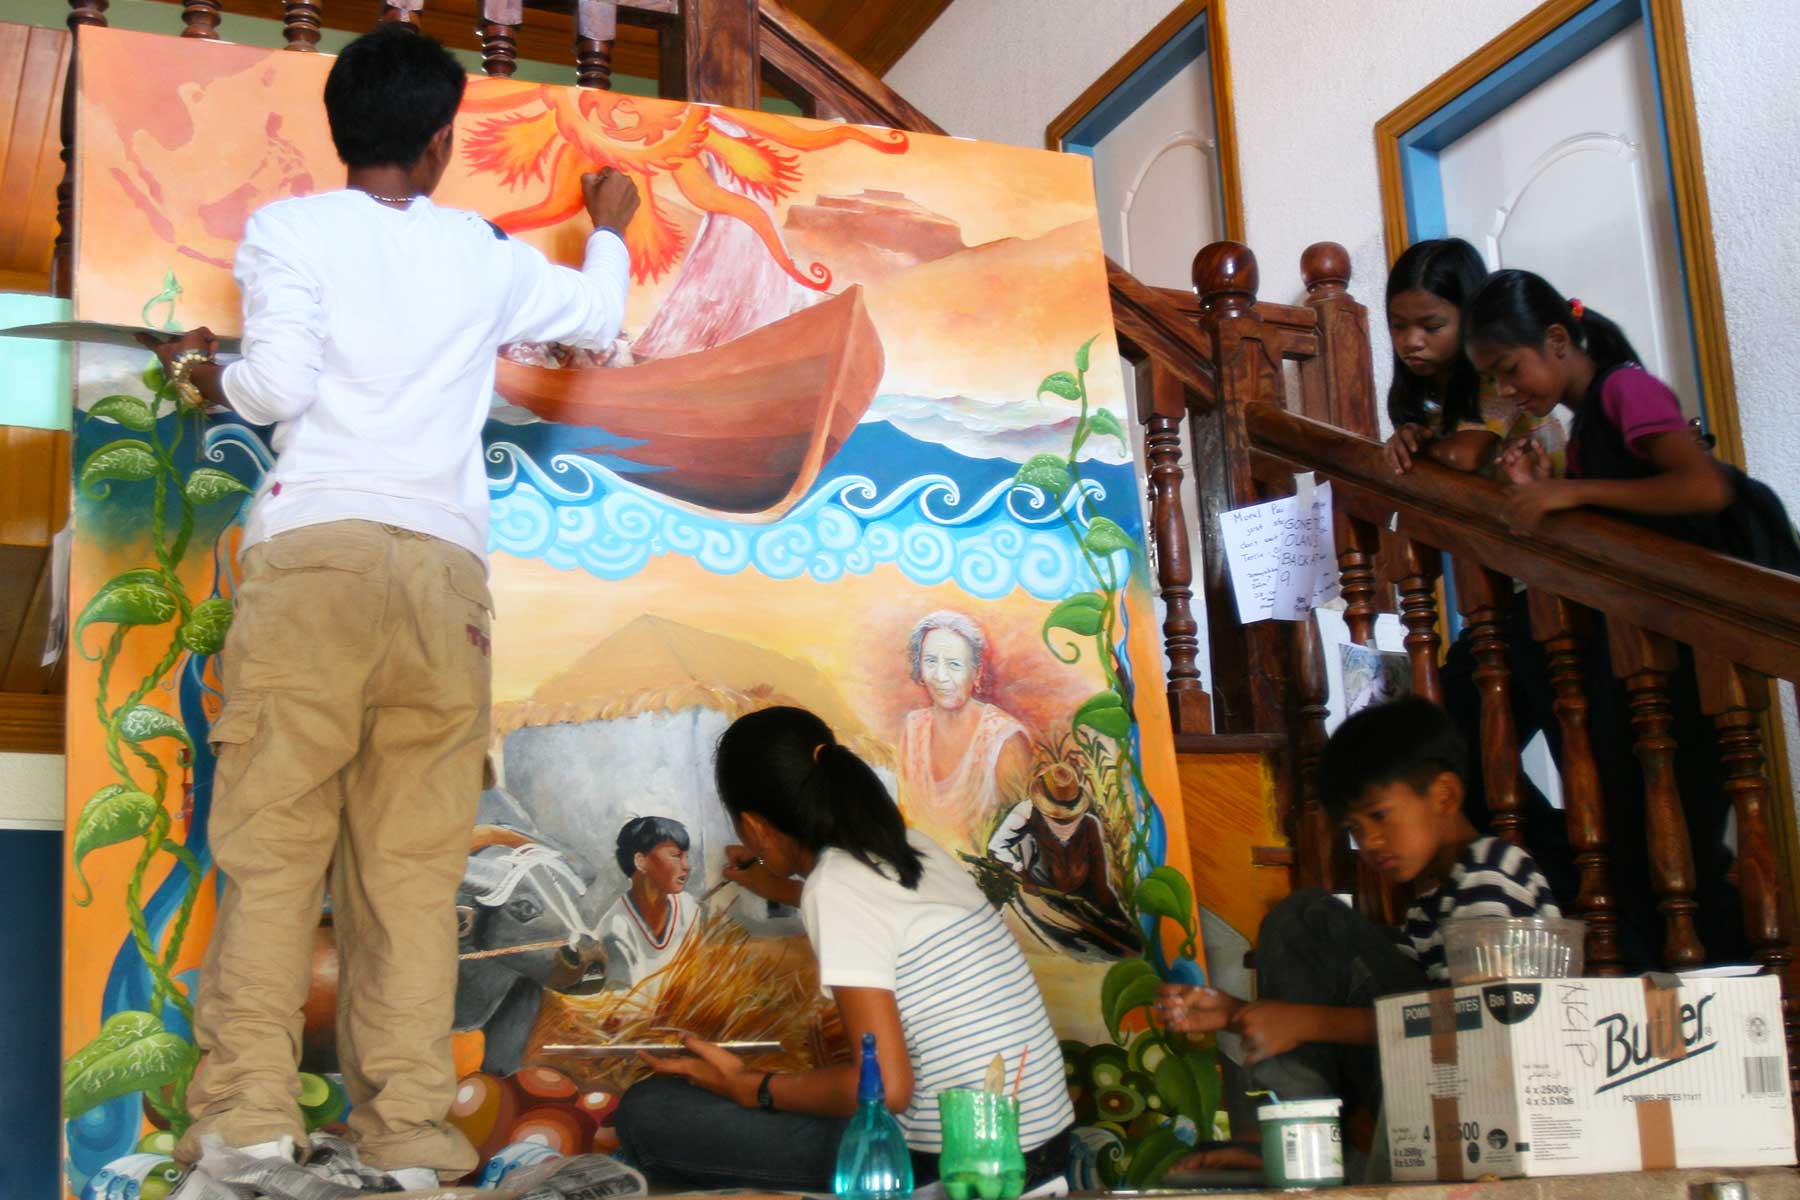 Batanes Islands Photo Journal - IIvatan Youth - Cultural Painting - Batanes Philippines - Austronesian Story - Steven Andrew Martin